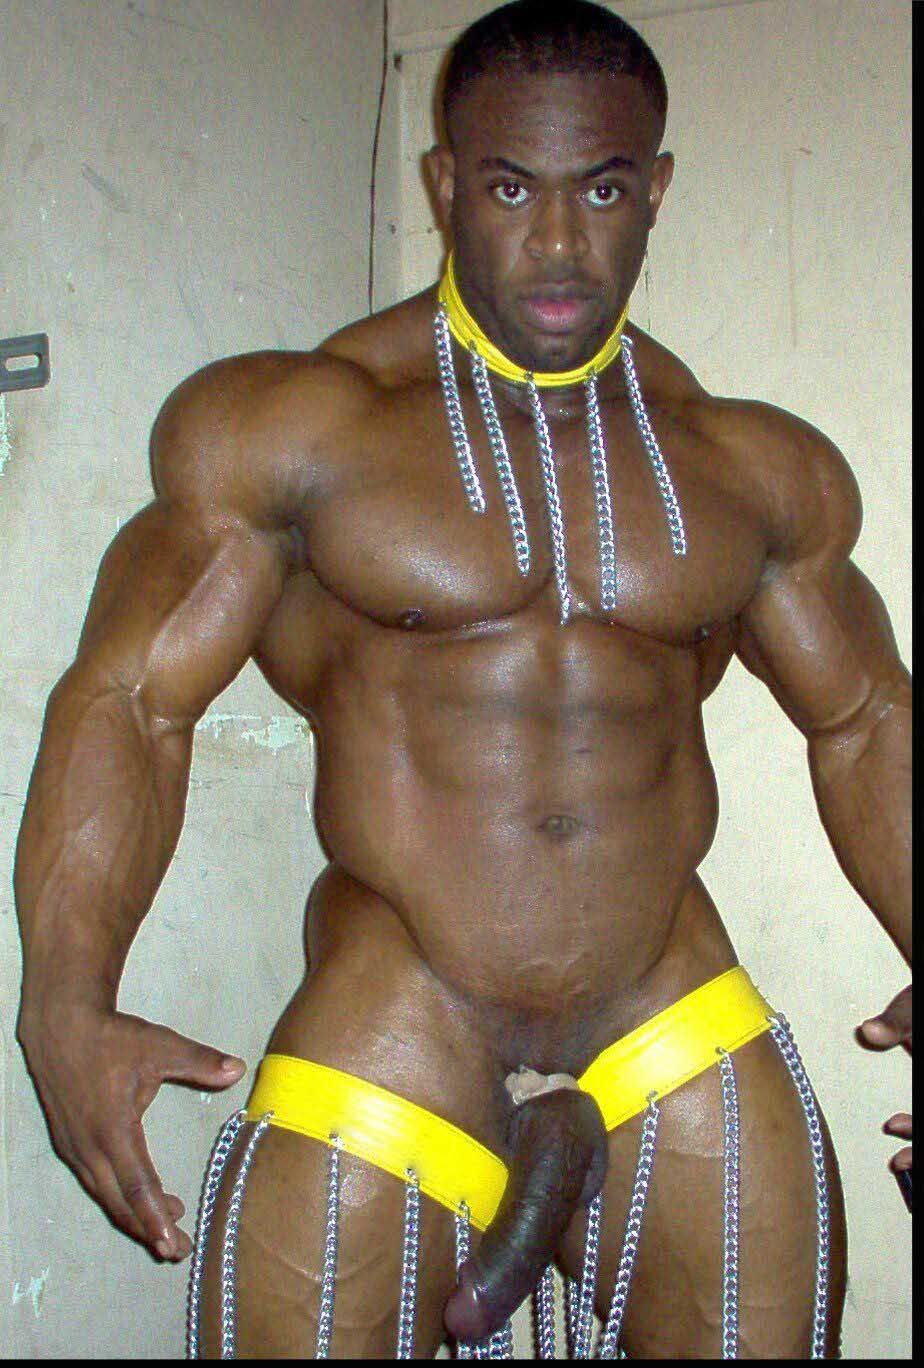 Black male gay strippers 💖 Hot black male strippers - Upicsz